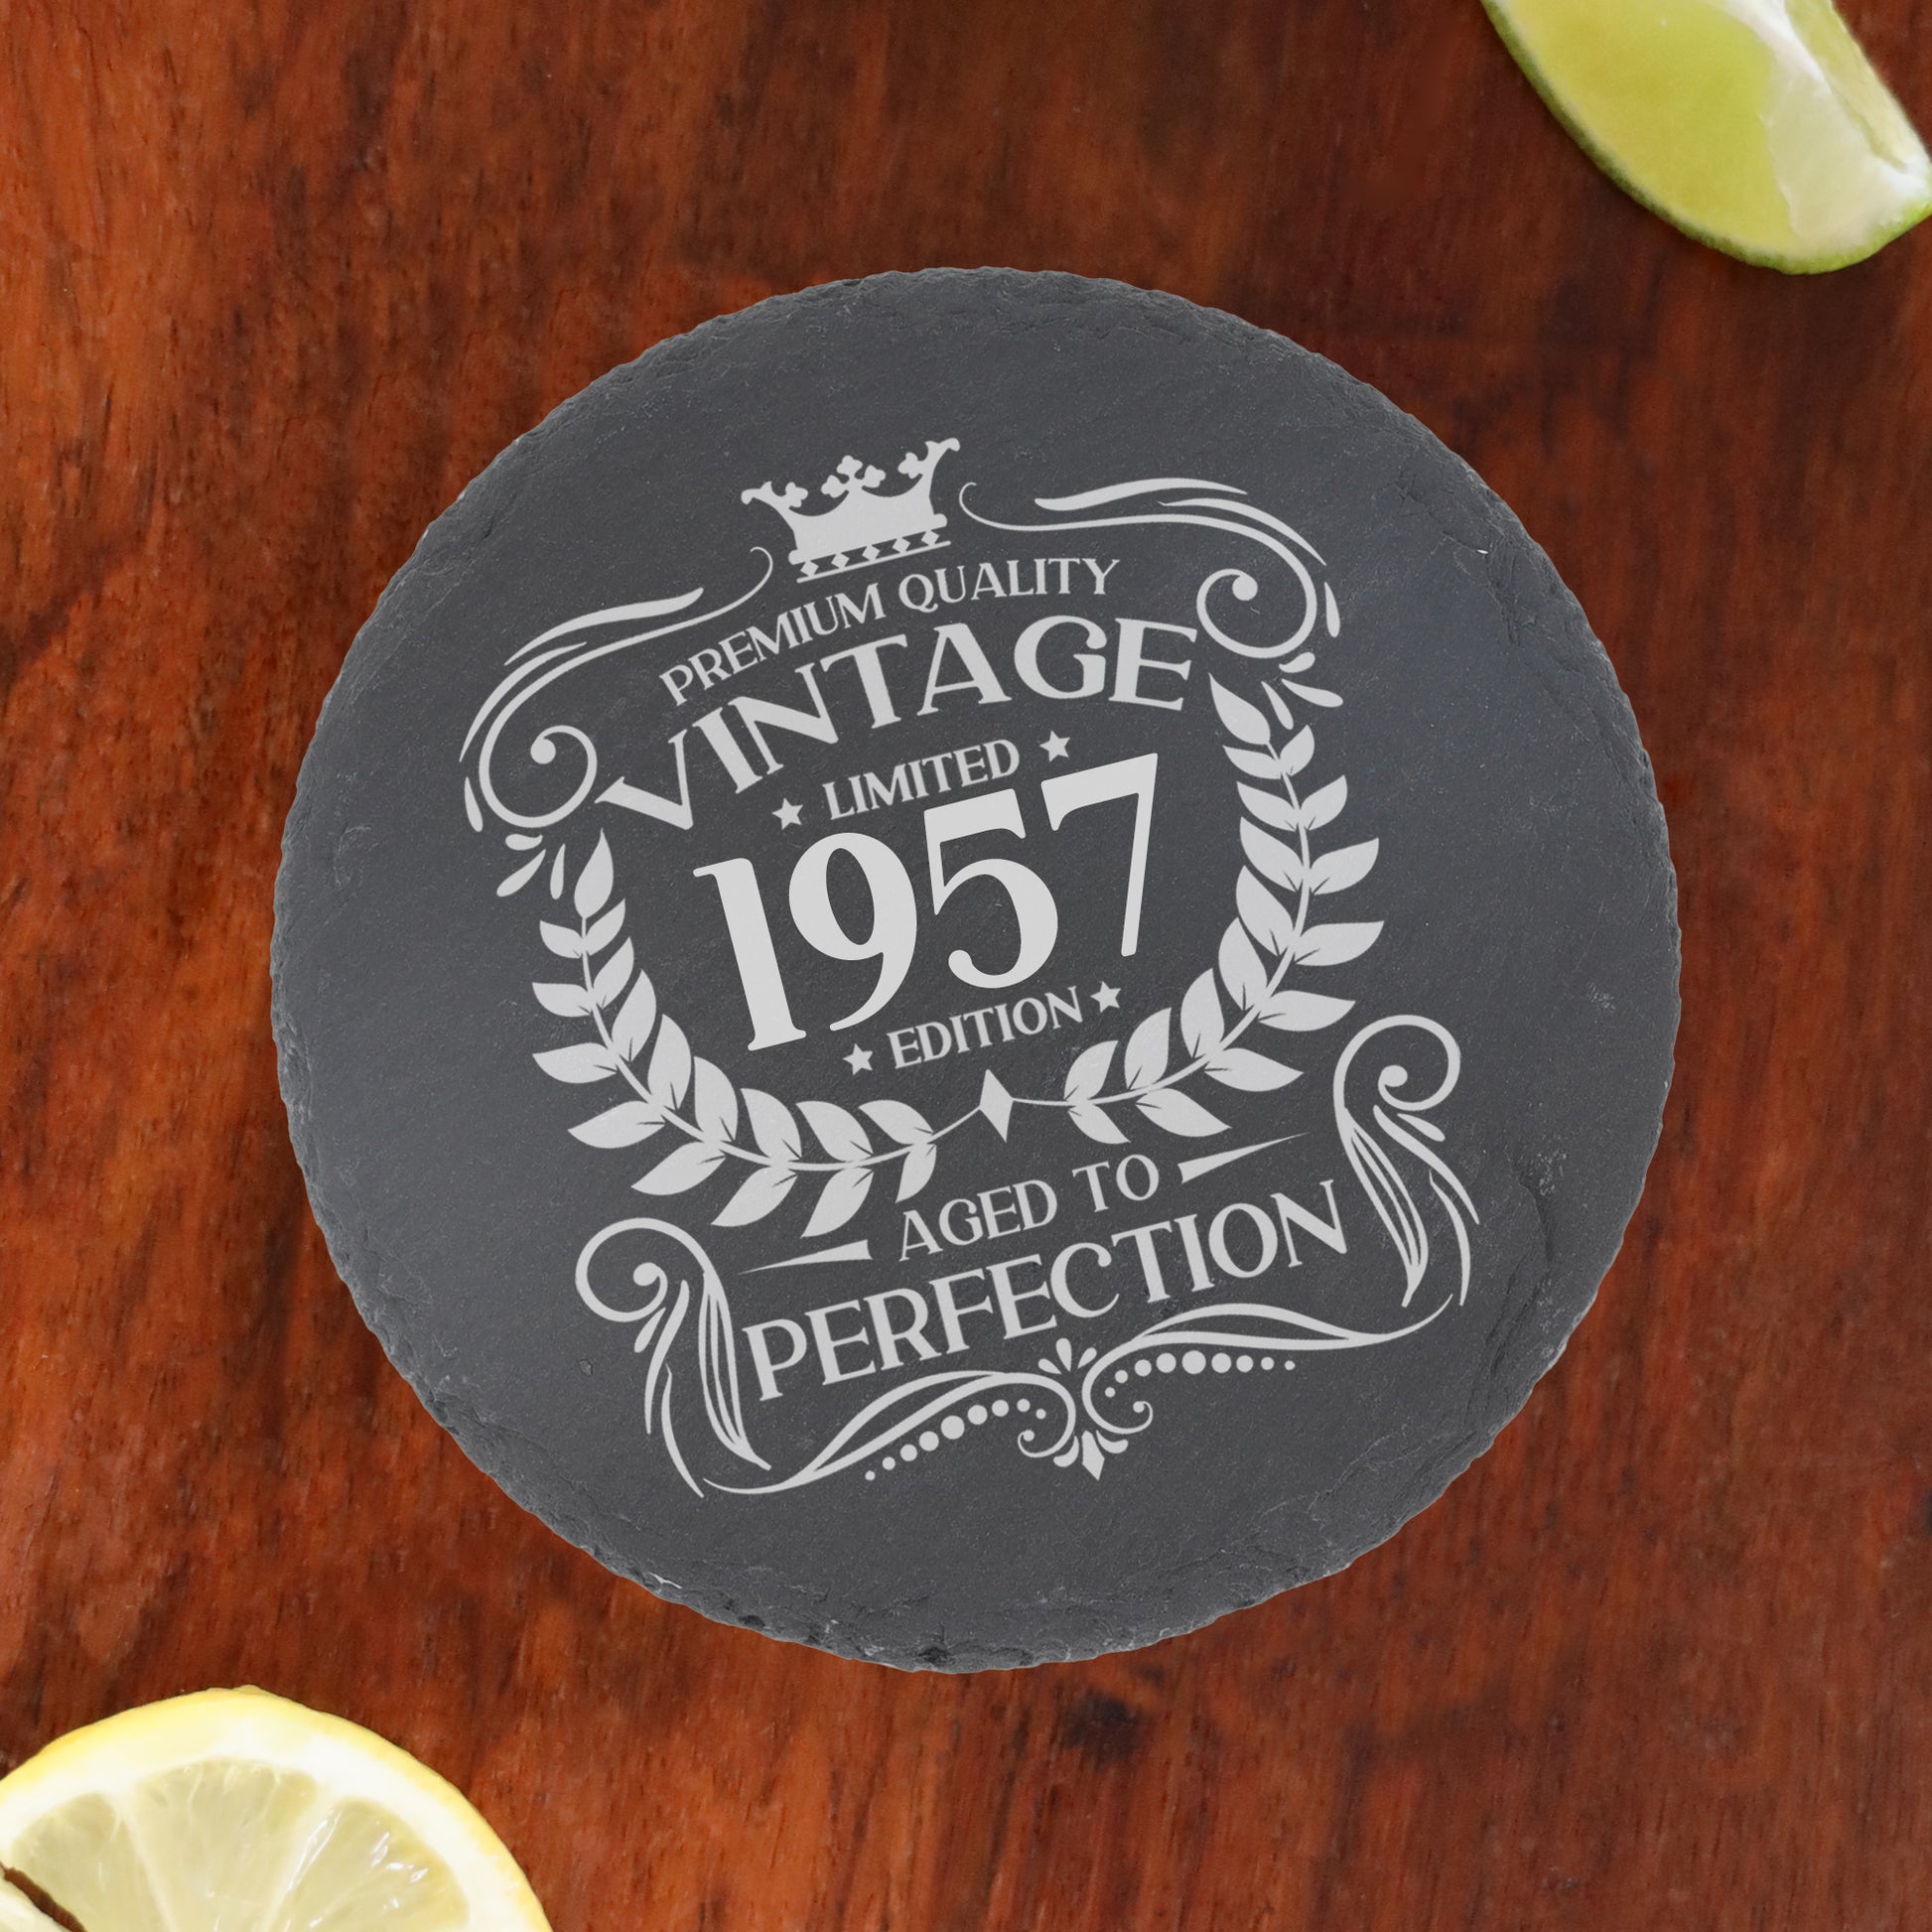 Vintage Engraved Balloon Gin Glass and/or Coaster Set Birthday Any Year All Ages  - Always Looking Good - Round Coaster Only  